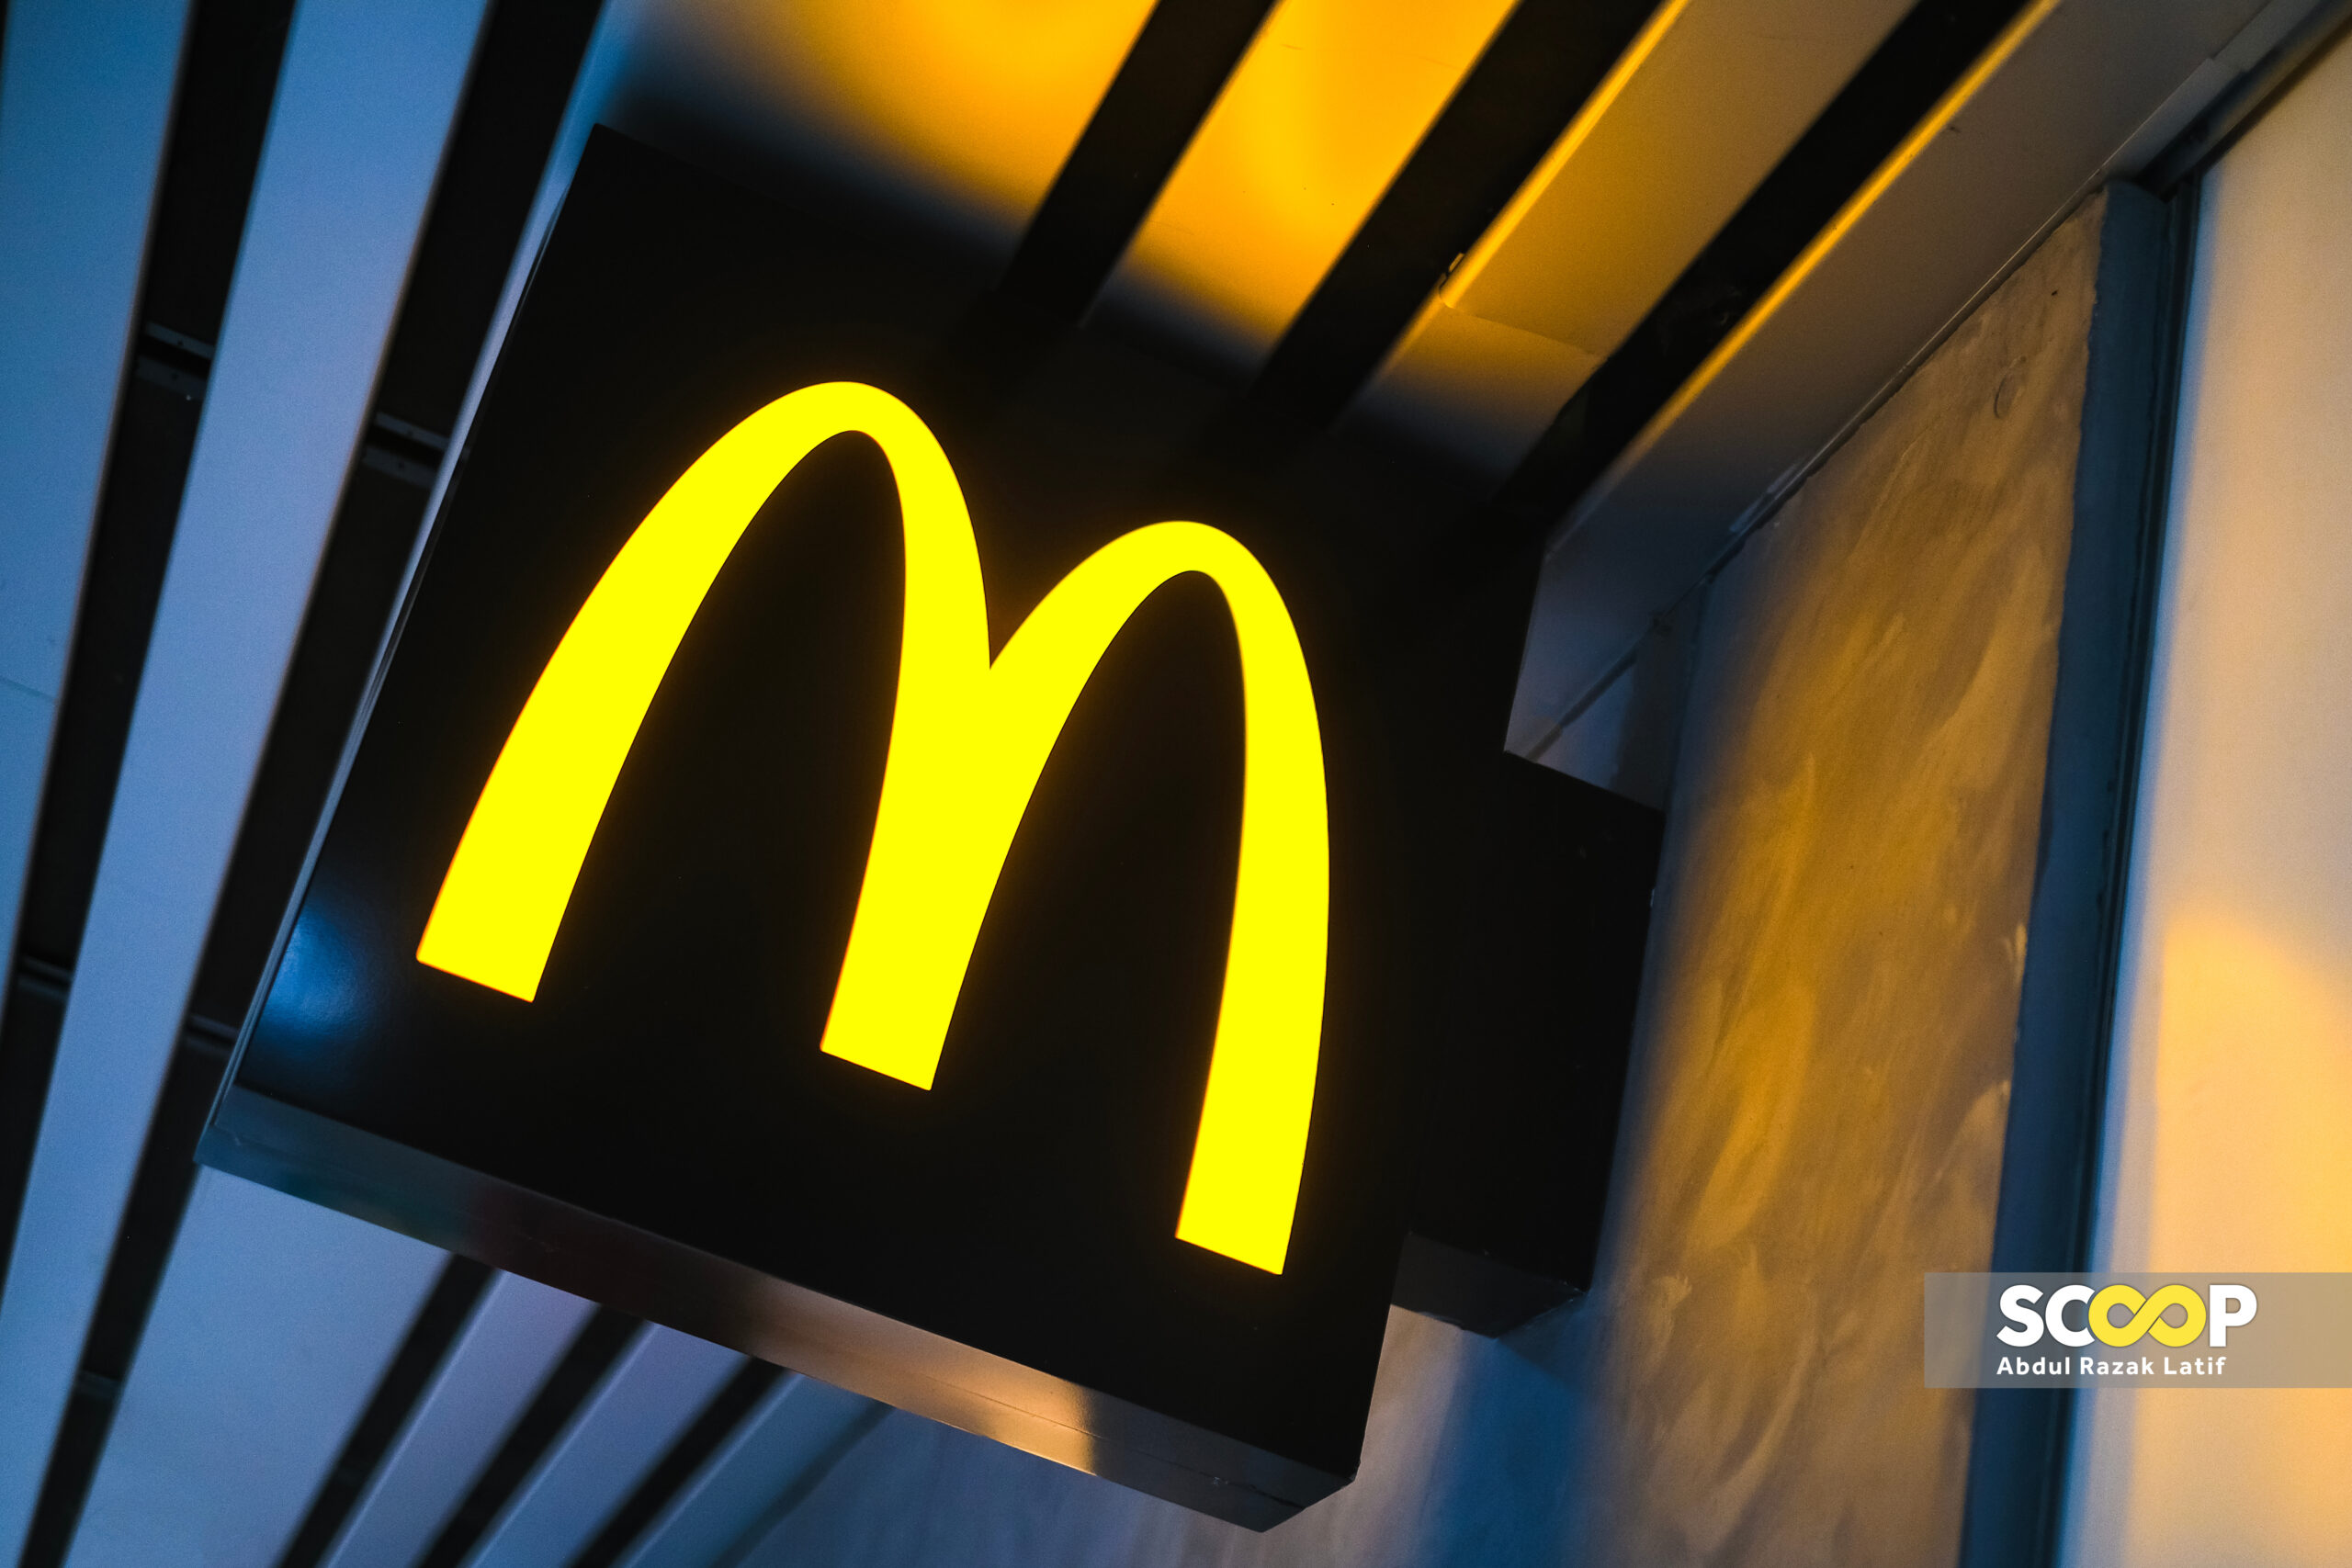 [UPDATED] McDonald’s M’sia is suing us for RM6 mil: BDS Malaysia